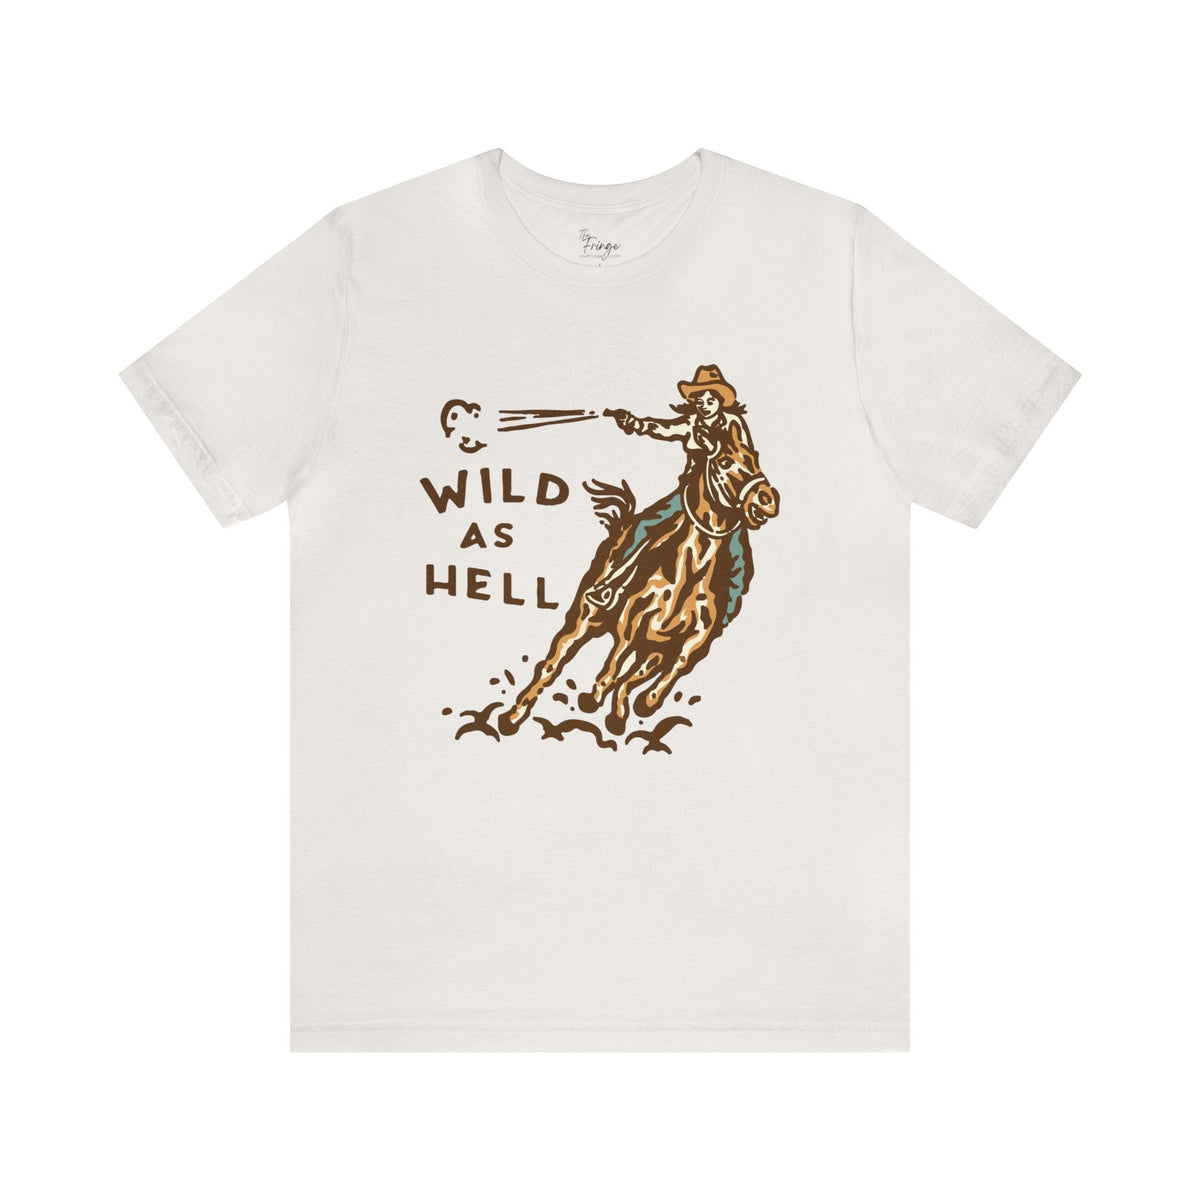 Wild as Hell Cowgirl Graphic Tee | Country Graphic Tee | Western T-shirt T-Shirt TheFringeCultureCollective